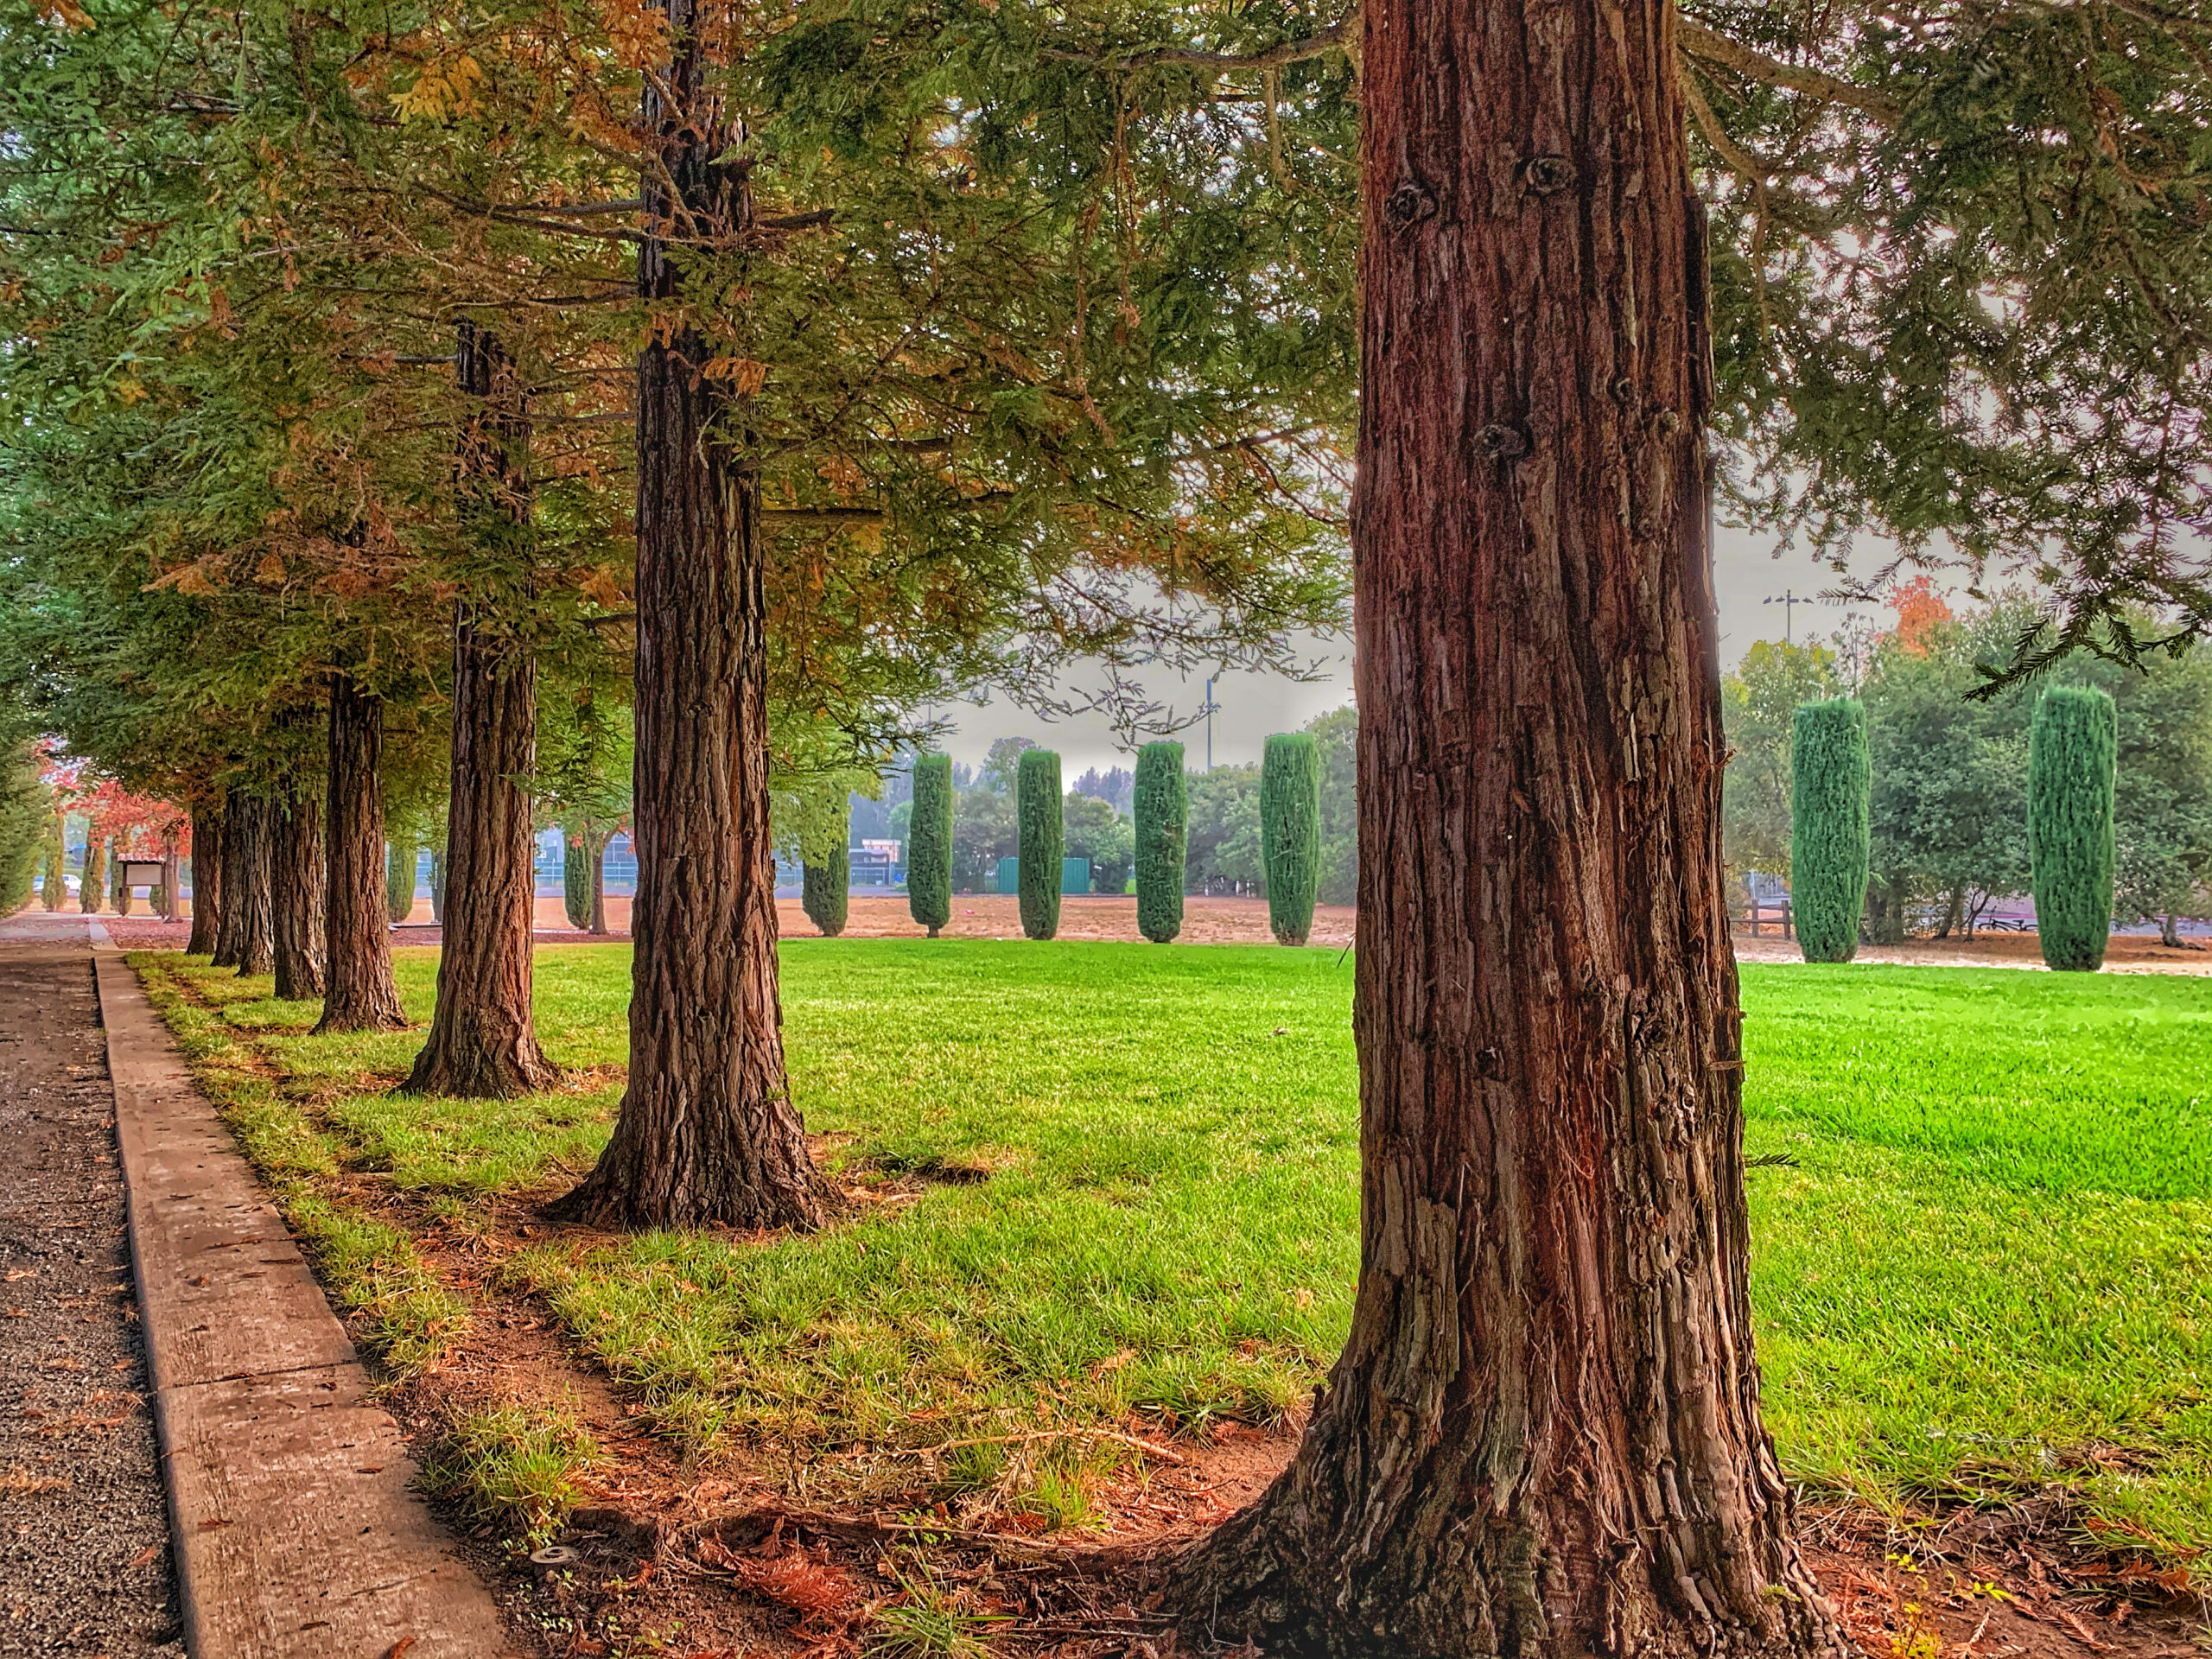 A row of trees lined up in a park.